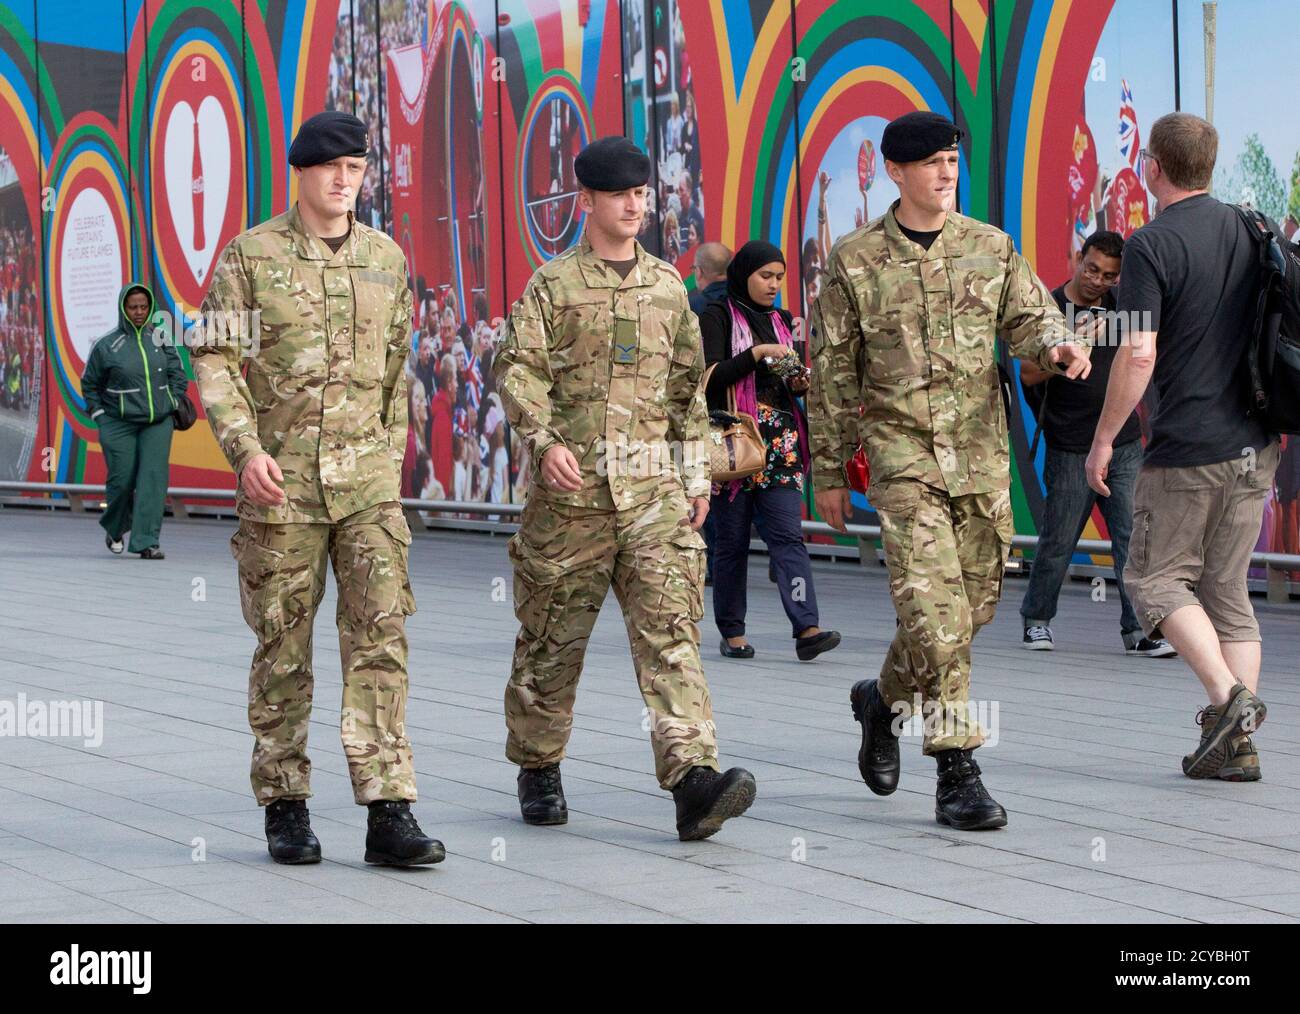 Members of the armed forces walk through the Westfield Shopping Centre, a major gateway for visitors to the London 2012 Olympic Park, in Stratford, east London July 19, 2012. REUTERS/Neil Hall (BRITAIN - Tags: SPORT OLYMPICS BUSINESS MILITARY) Stock Photo